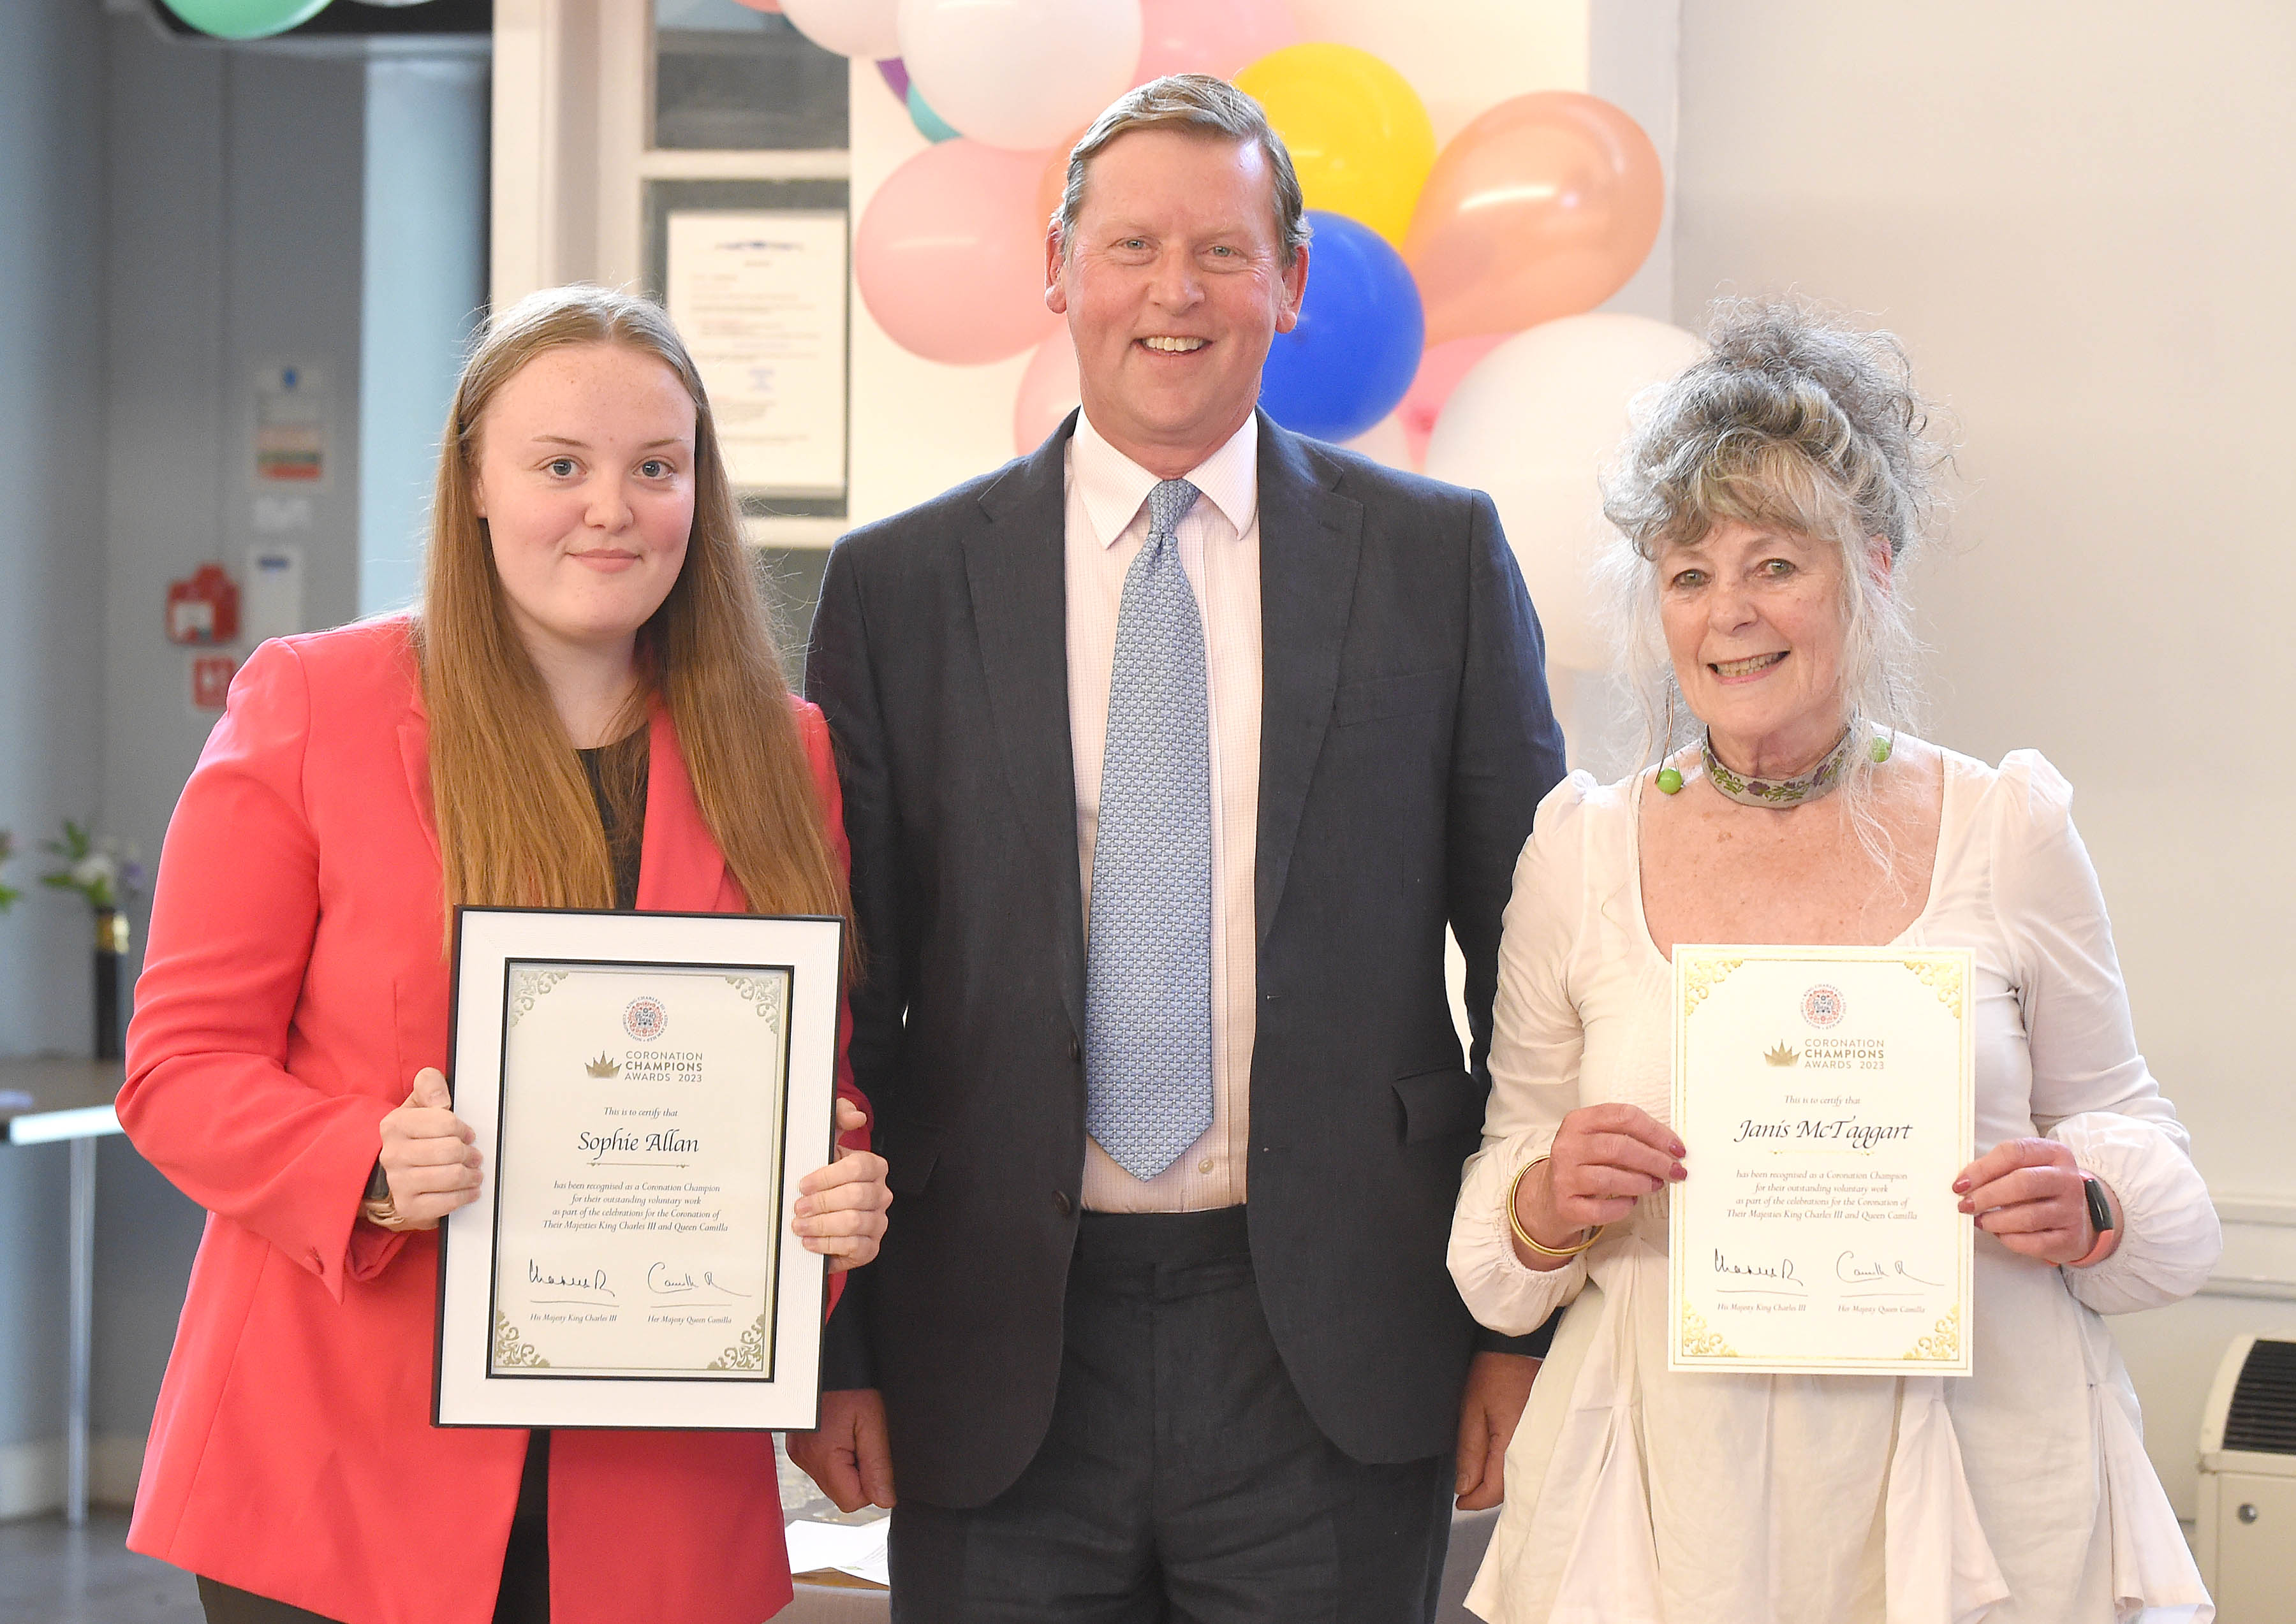 Coronation Champions Sophie Allan & Janis McTaggart with the Lord-Lieutenant